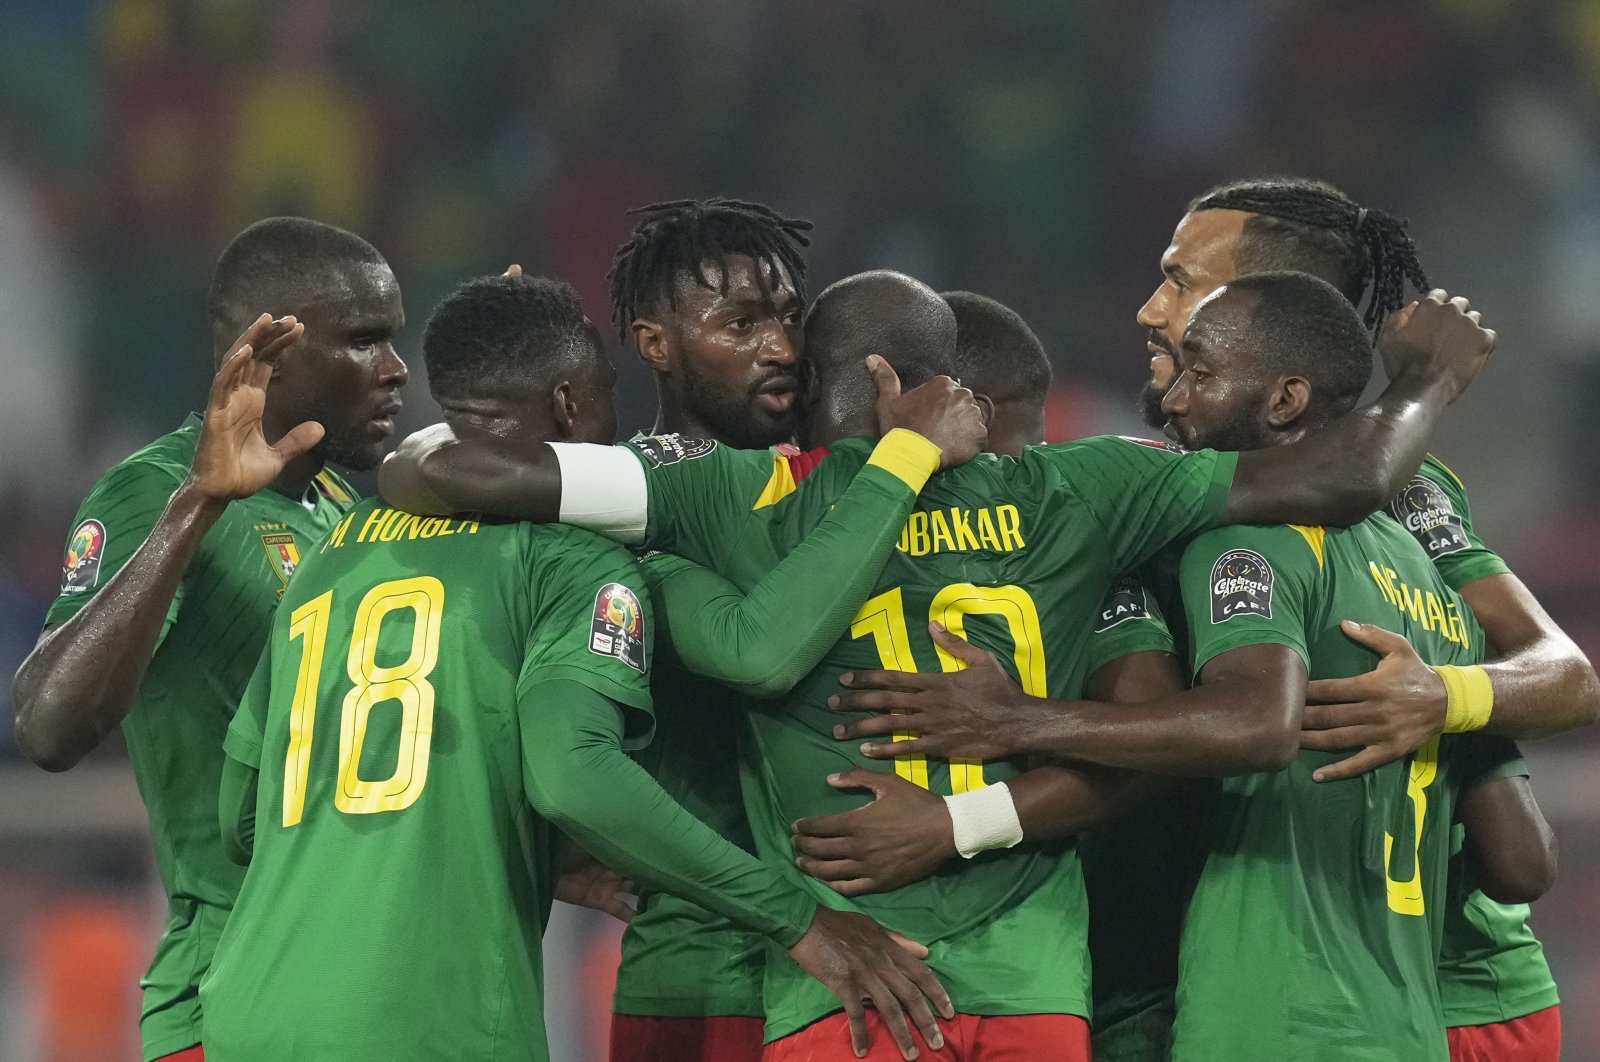 Cameroon&#039;s Karl Toko-Ekambi (C) celebrates with teammates after scoring in an AFCON match against Comoros, Yaounde, Cameroon, Jan. 24, 2022. (AP Photo)